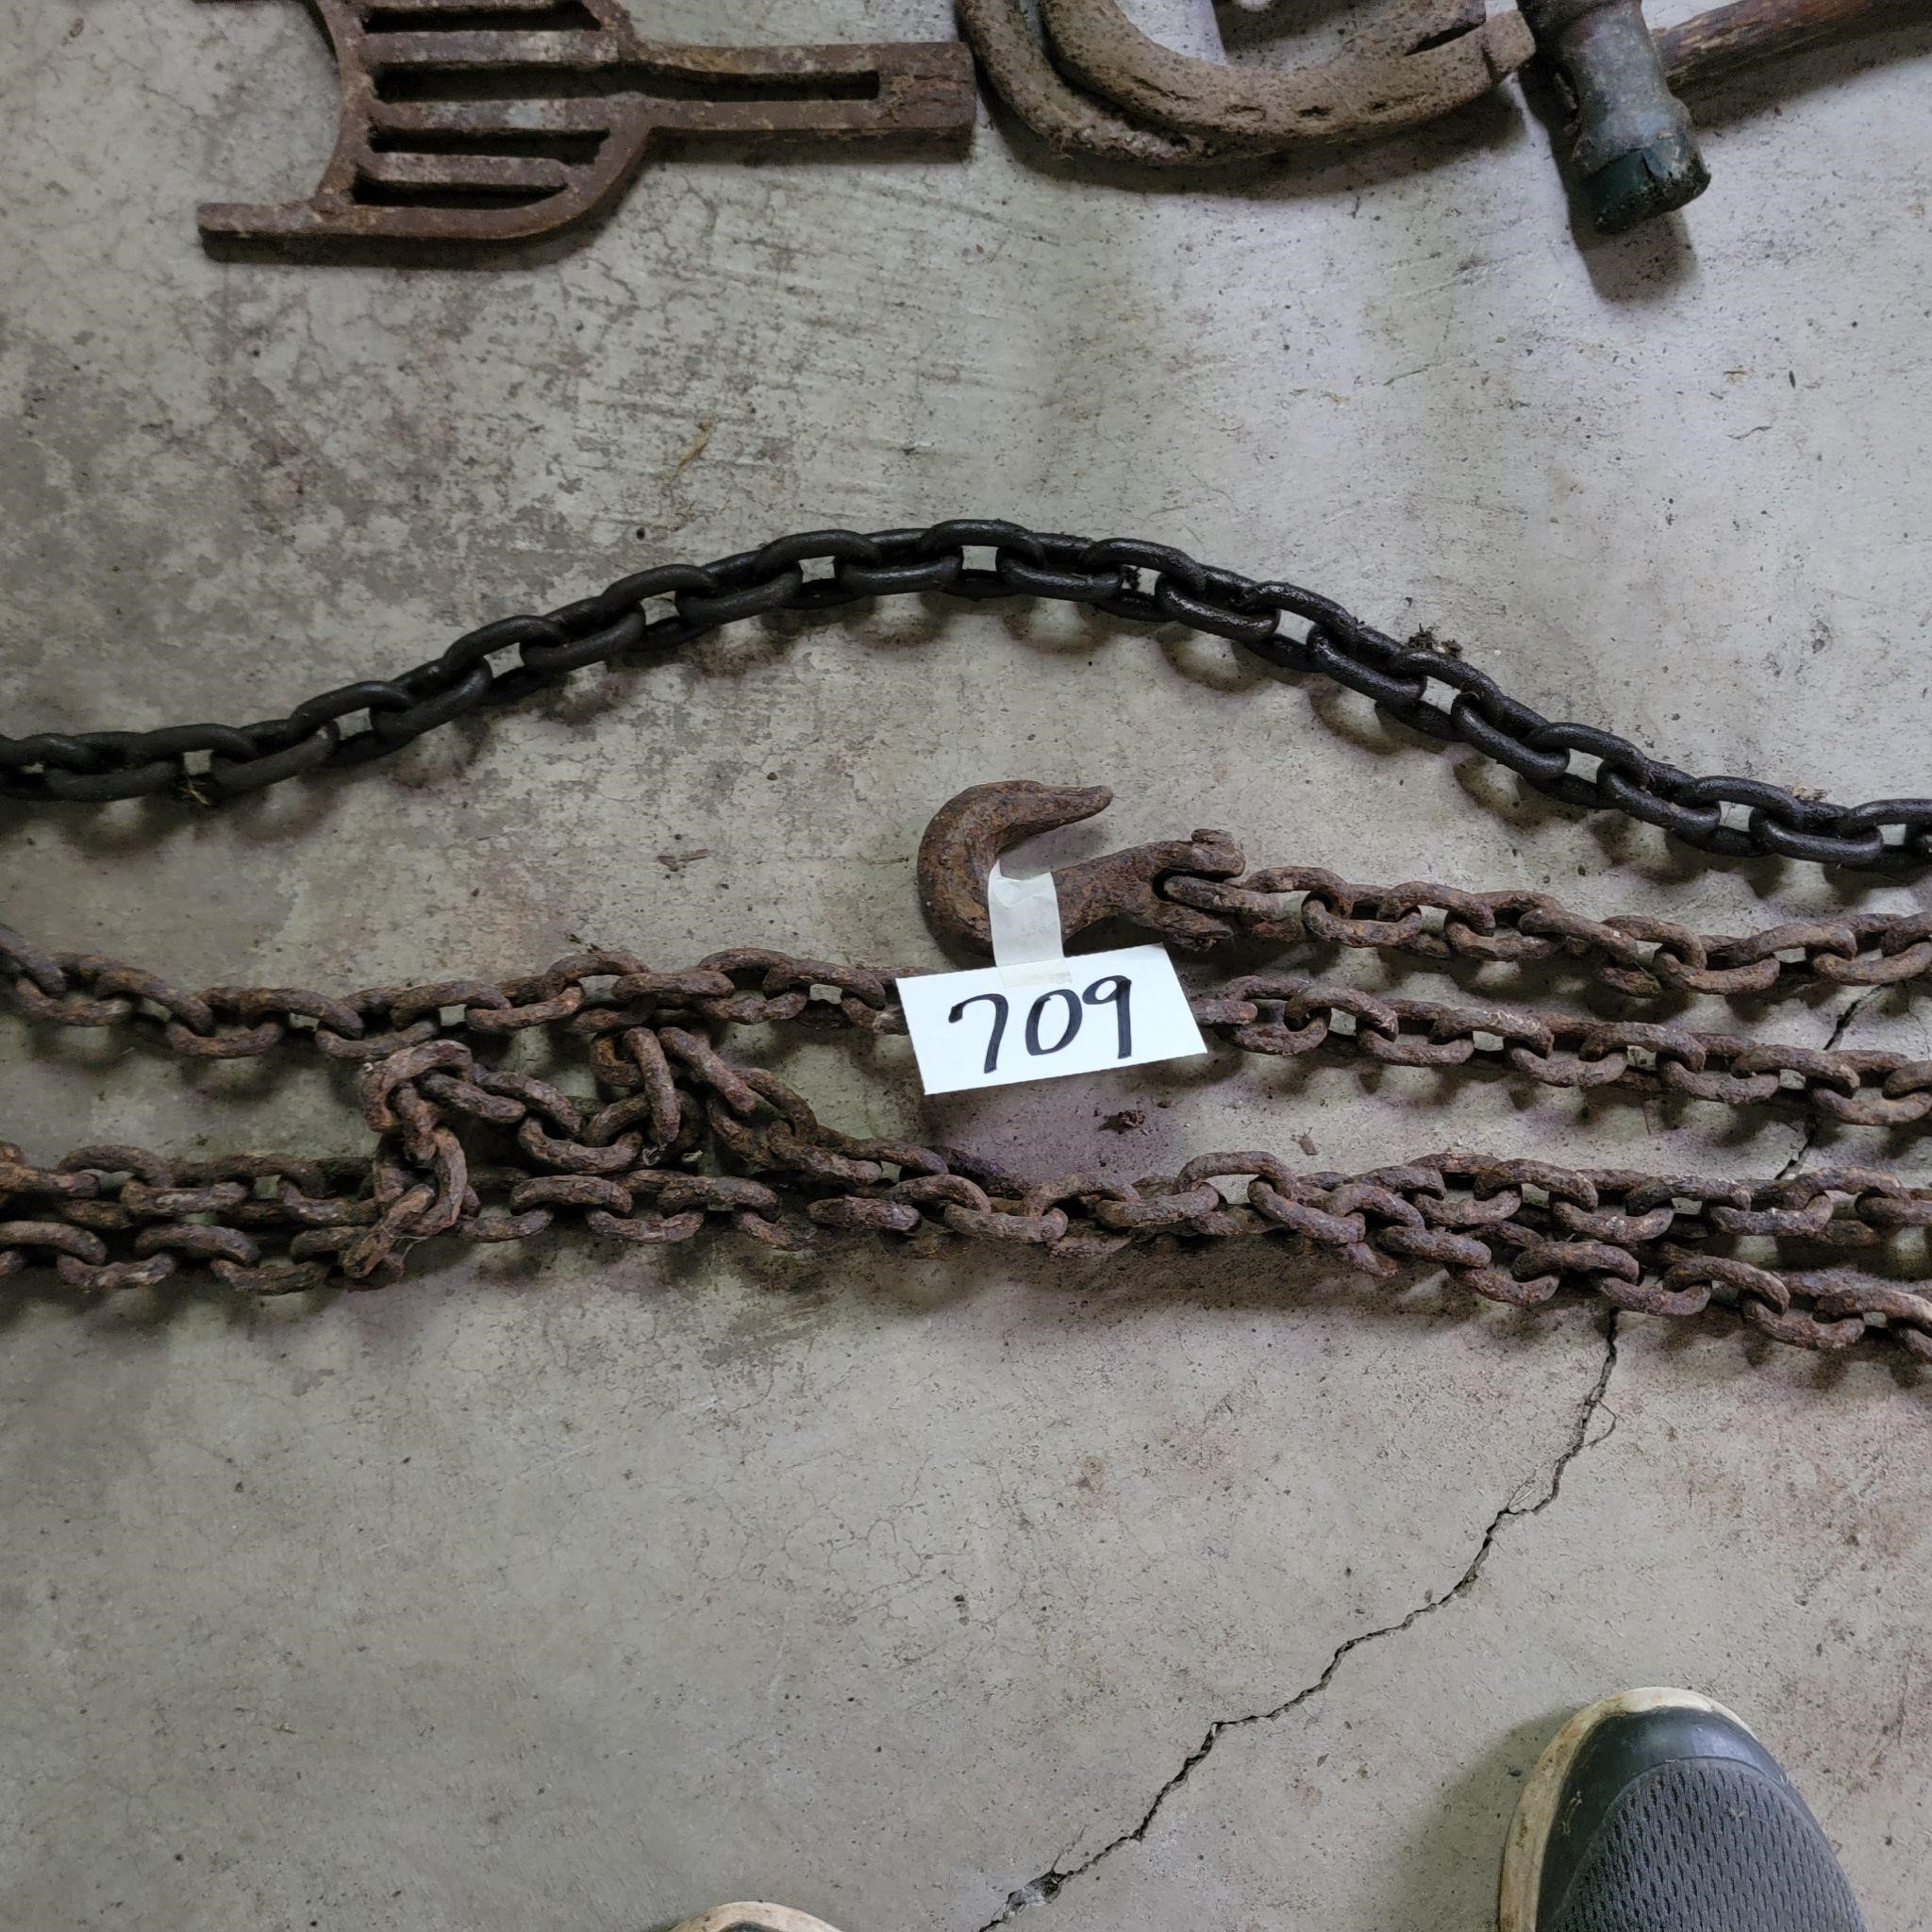 Nice Log Chain 15' or more and second Chain w/hook